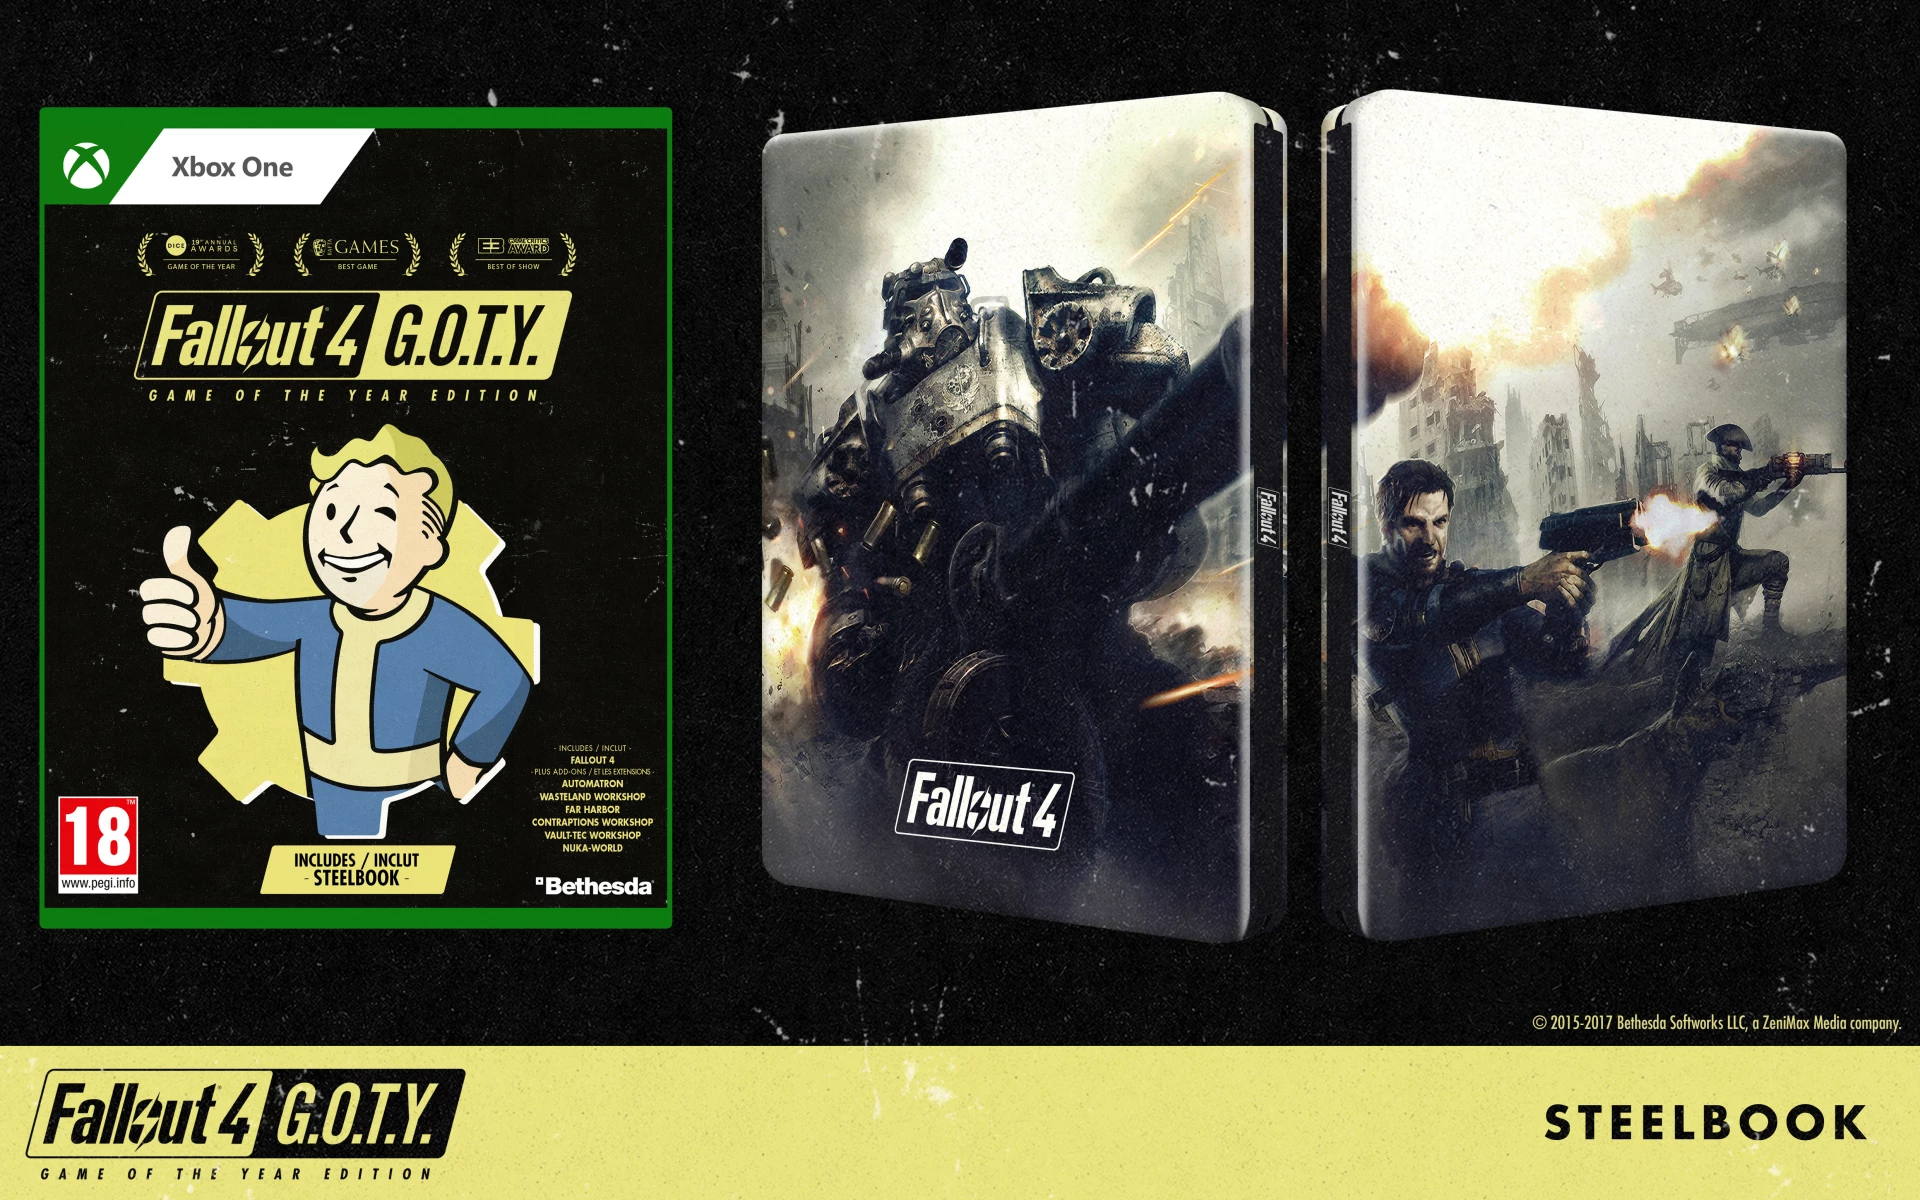 Fallout 4 GOTY - 25th Anniversary Steelbook Edition (Xbox One), Bethesda 